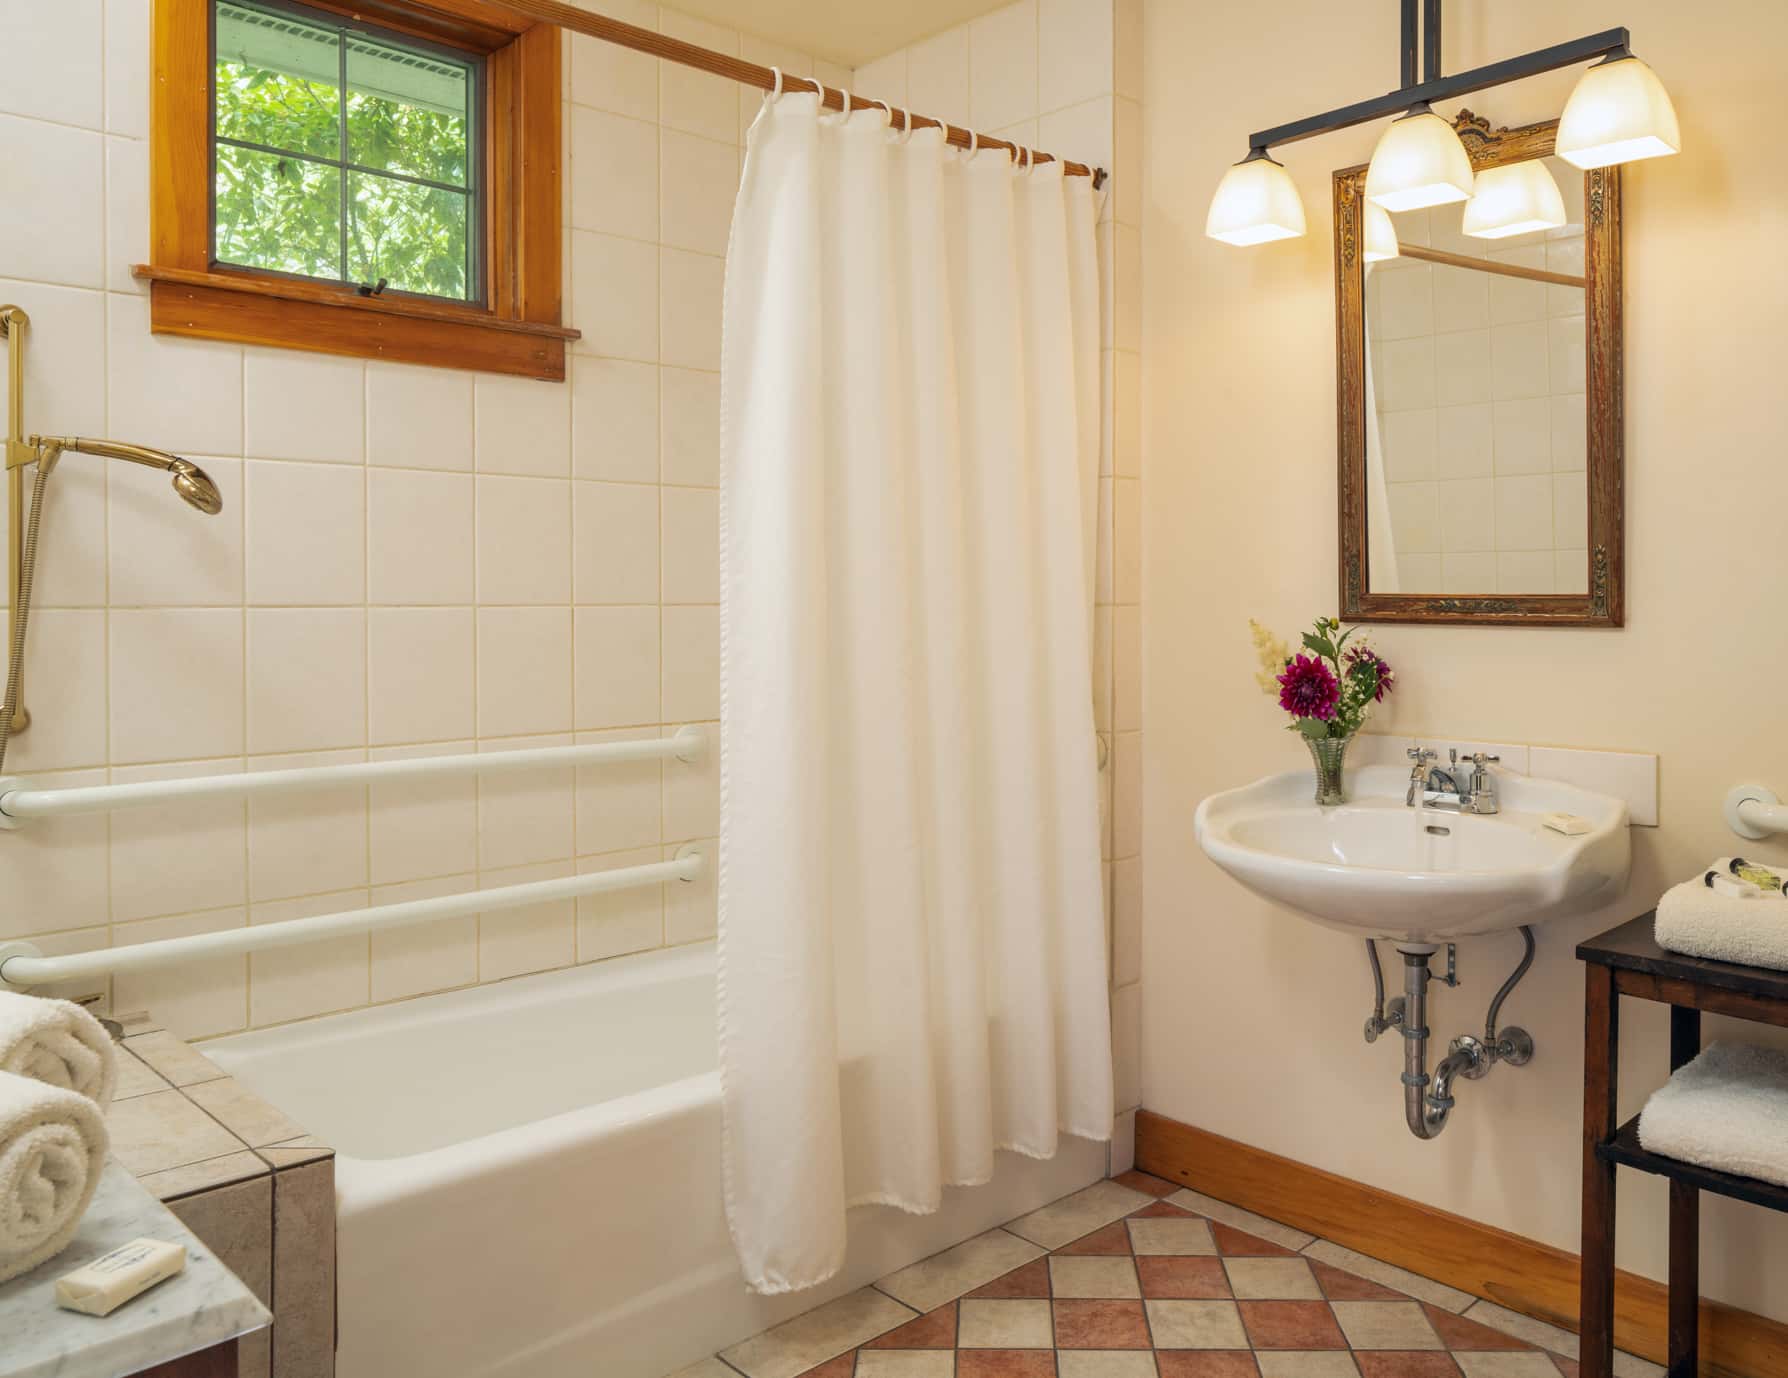 Cape house Suite bathroom with a shower tub combination